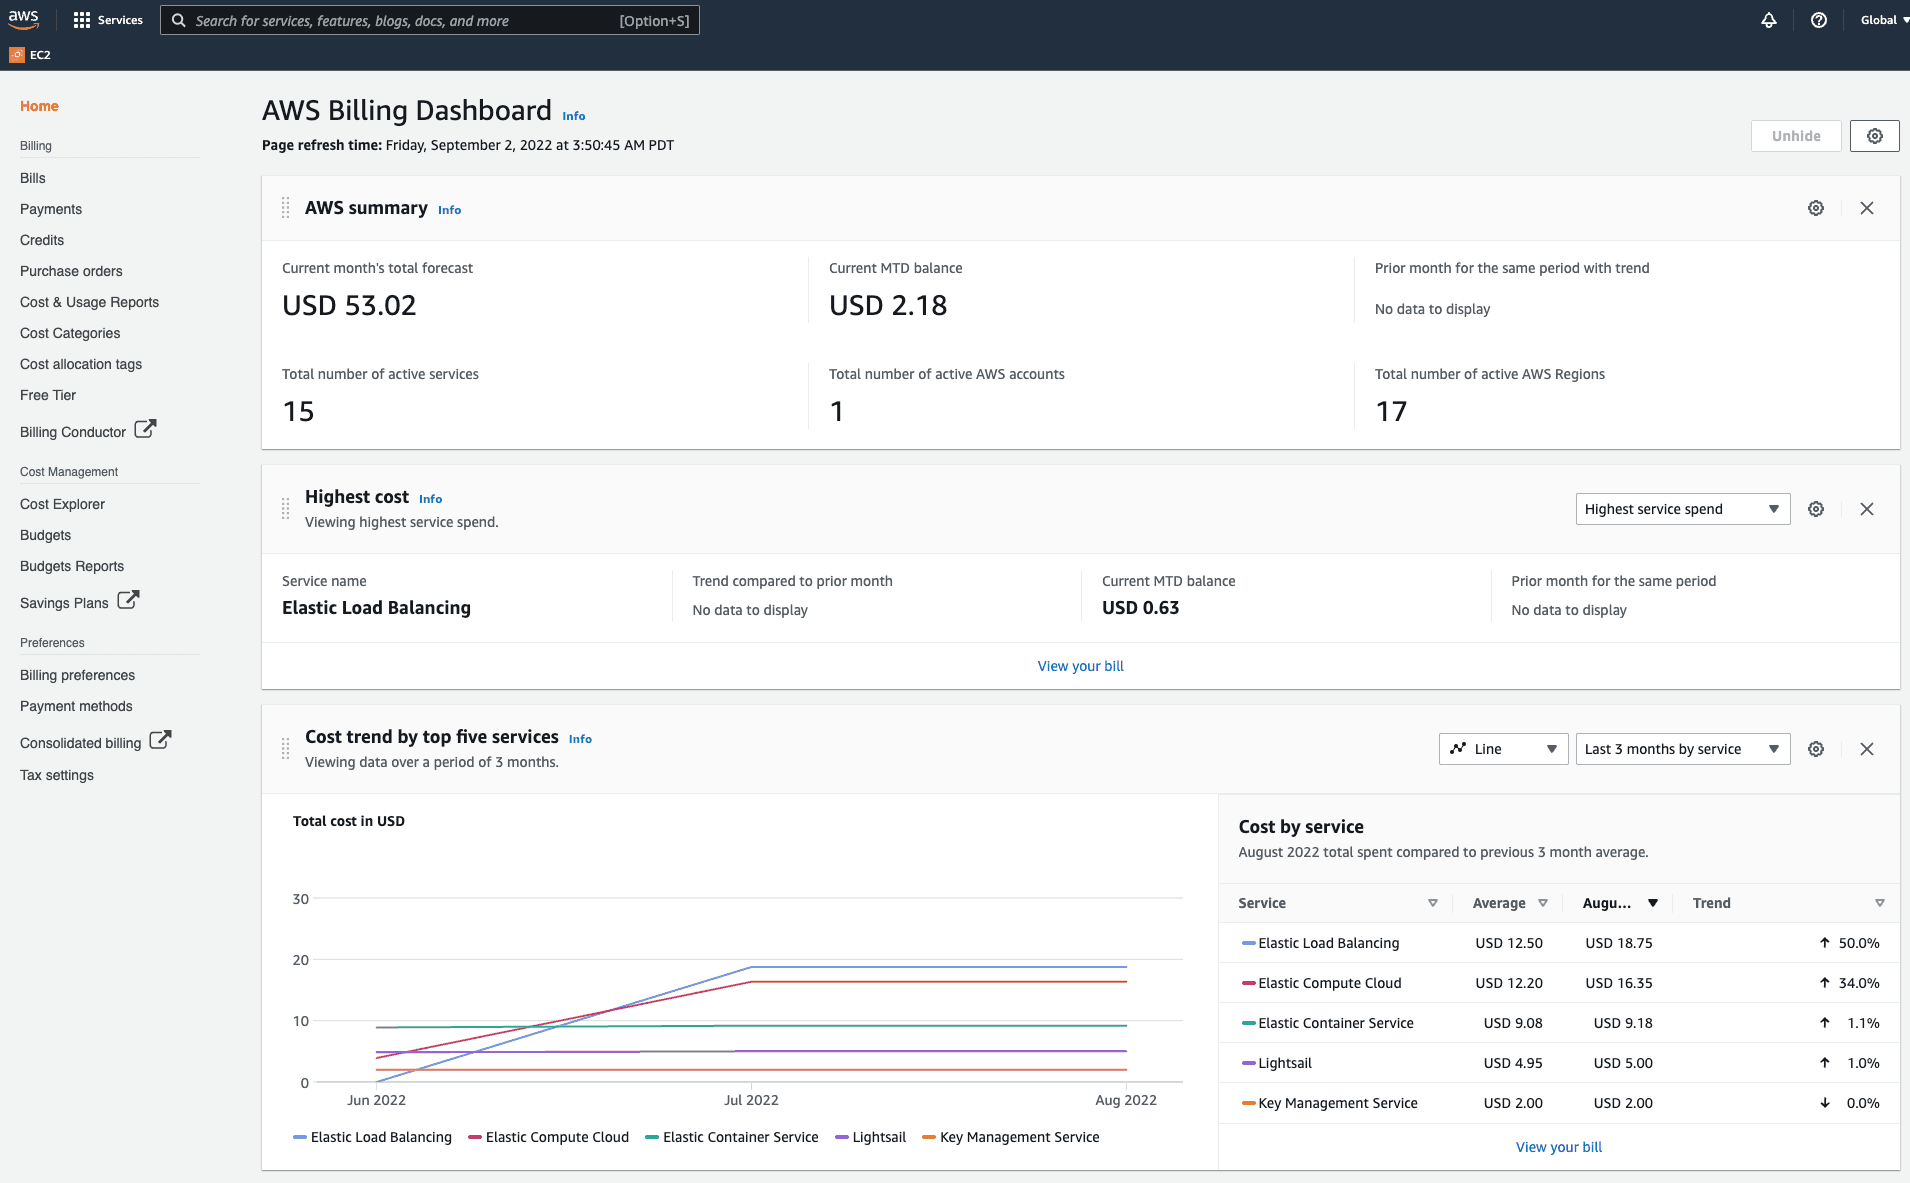 AWS Billing Dashboard showing overview of costs